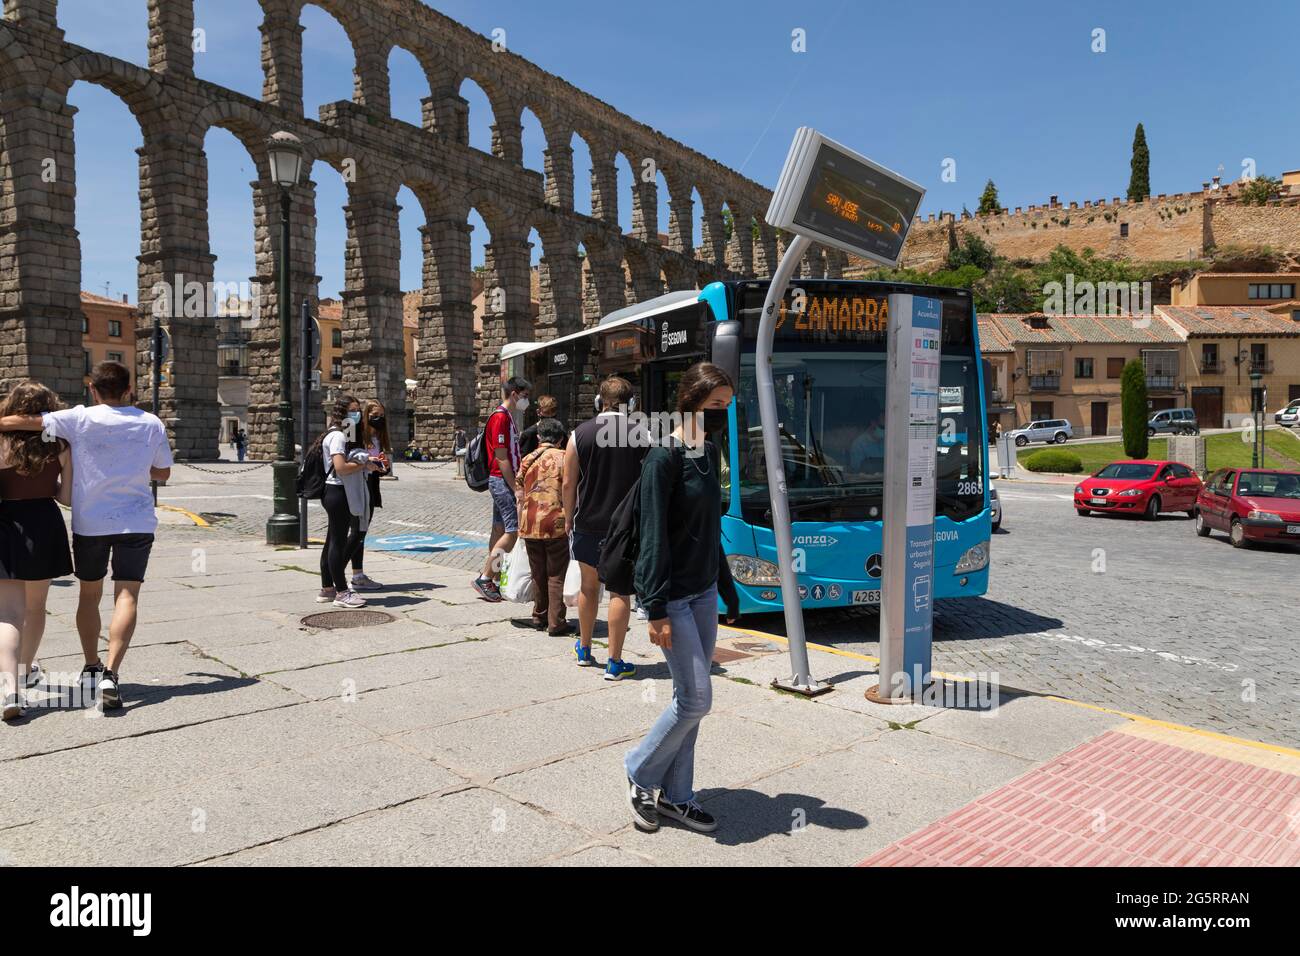 Segovia, Spain - June 2, 2021: Several people wait to get on the bus of line 9, Zamarramala, in front of the Aqueduct of Segovia Stock Photo